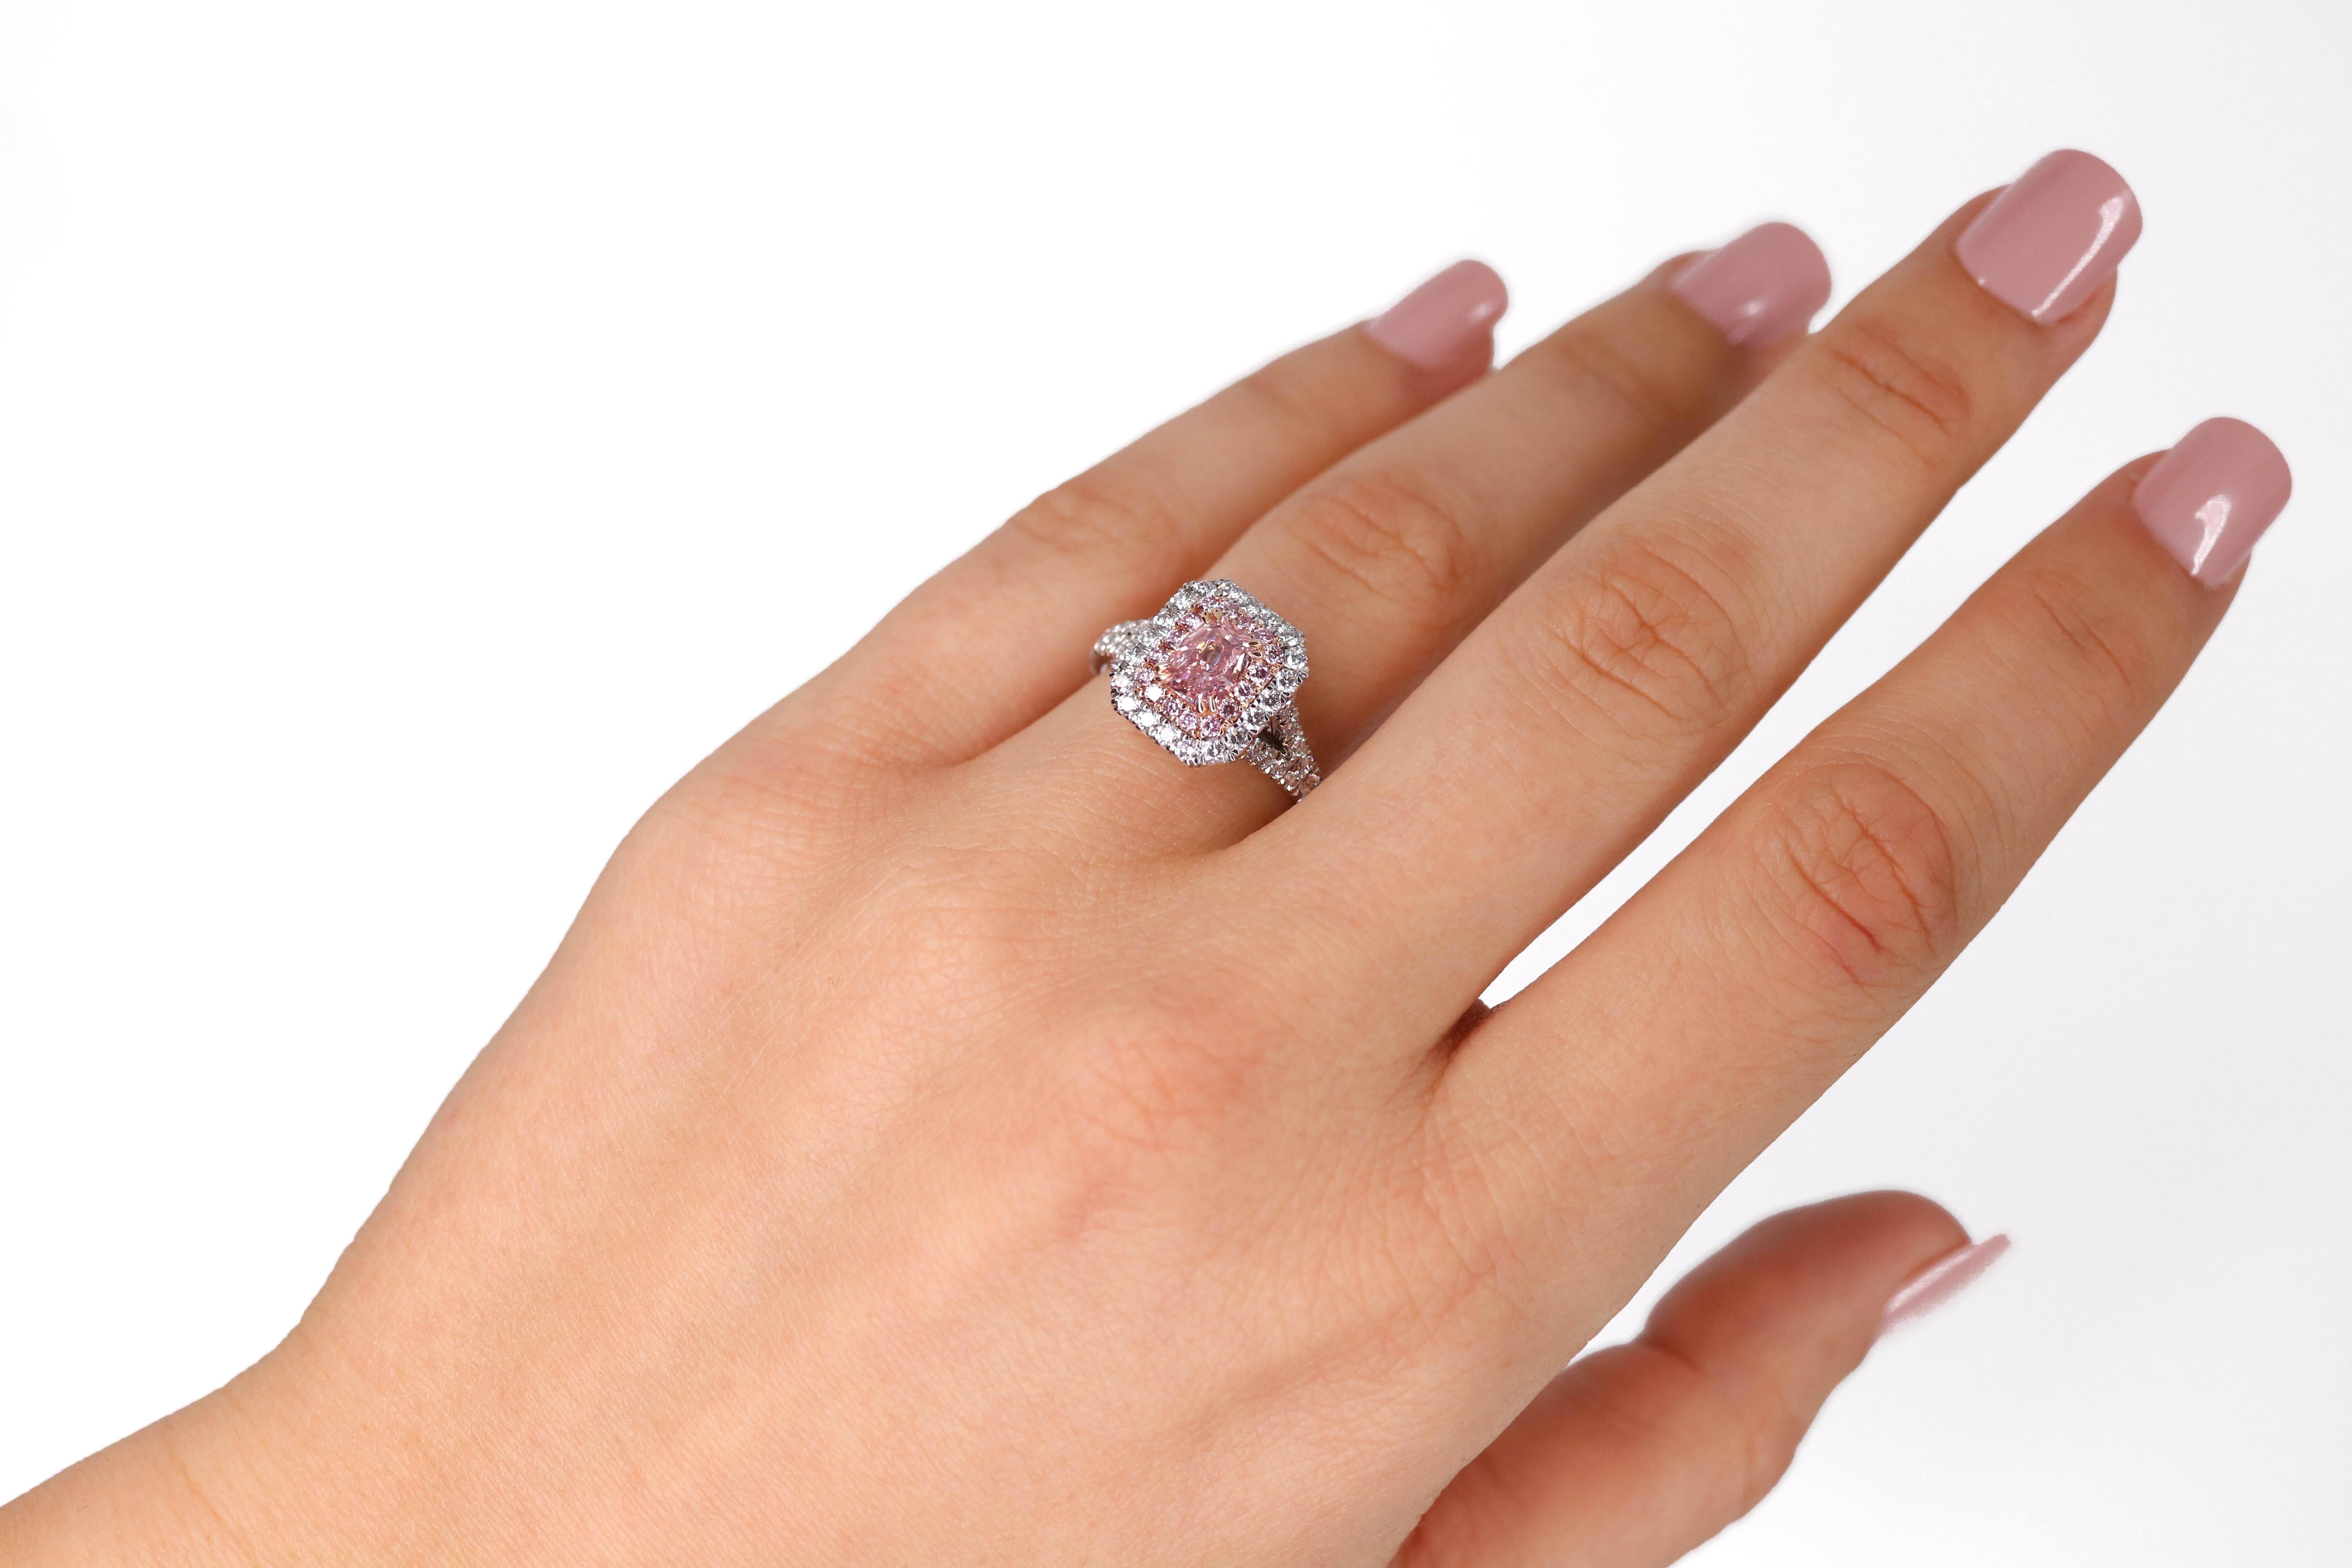 Radiant Cut Exceptional GIA Certified Radiant 0.77 Carat Fancy Intense Pink Diamond Ring For Sale